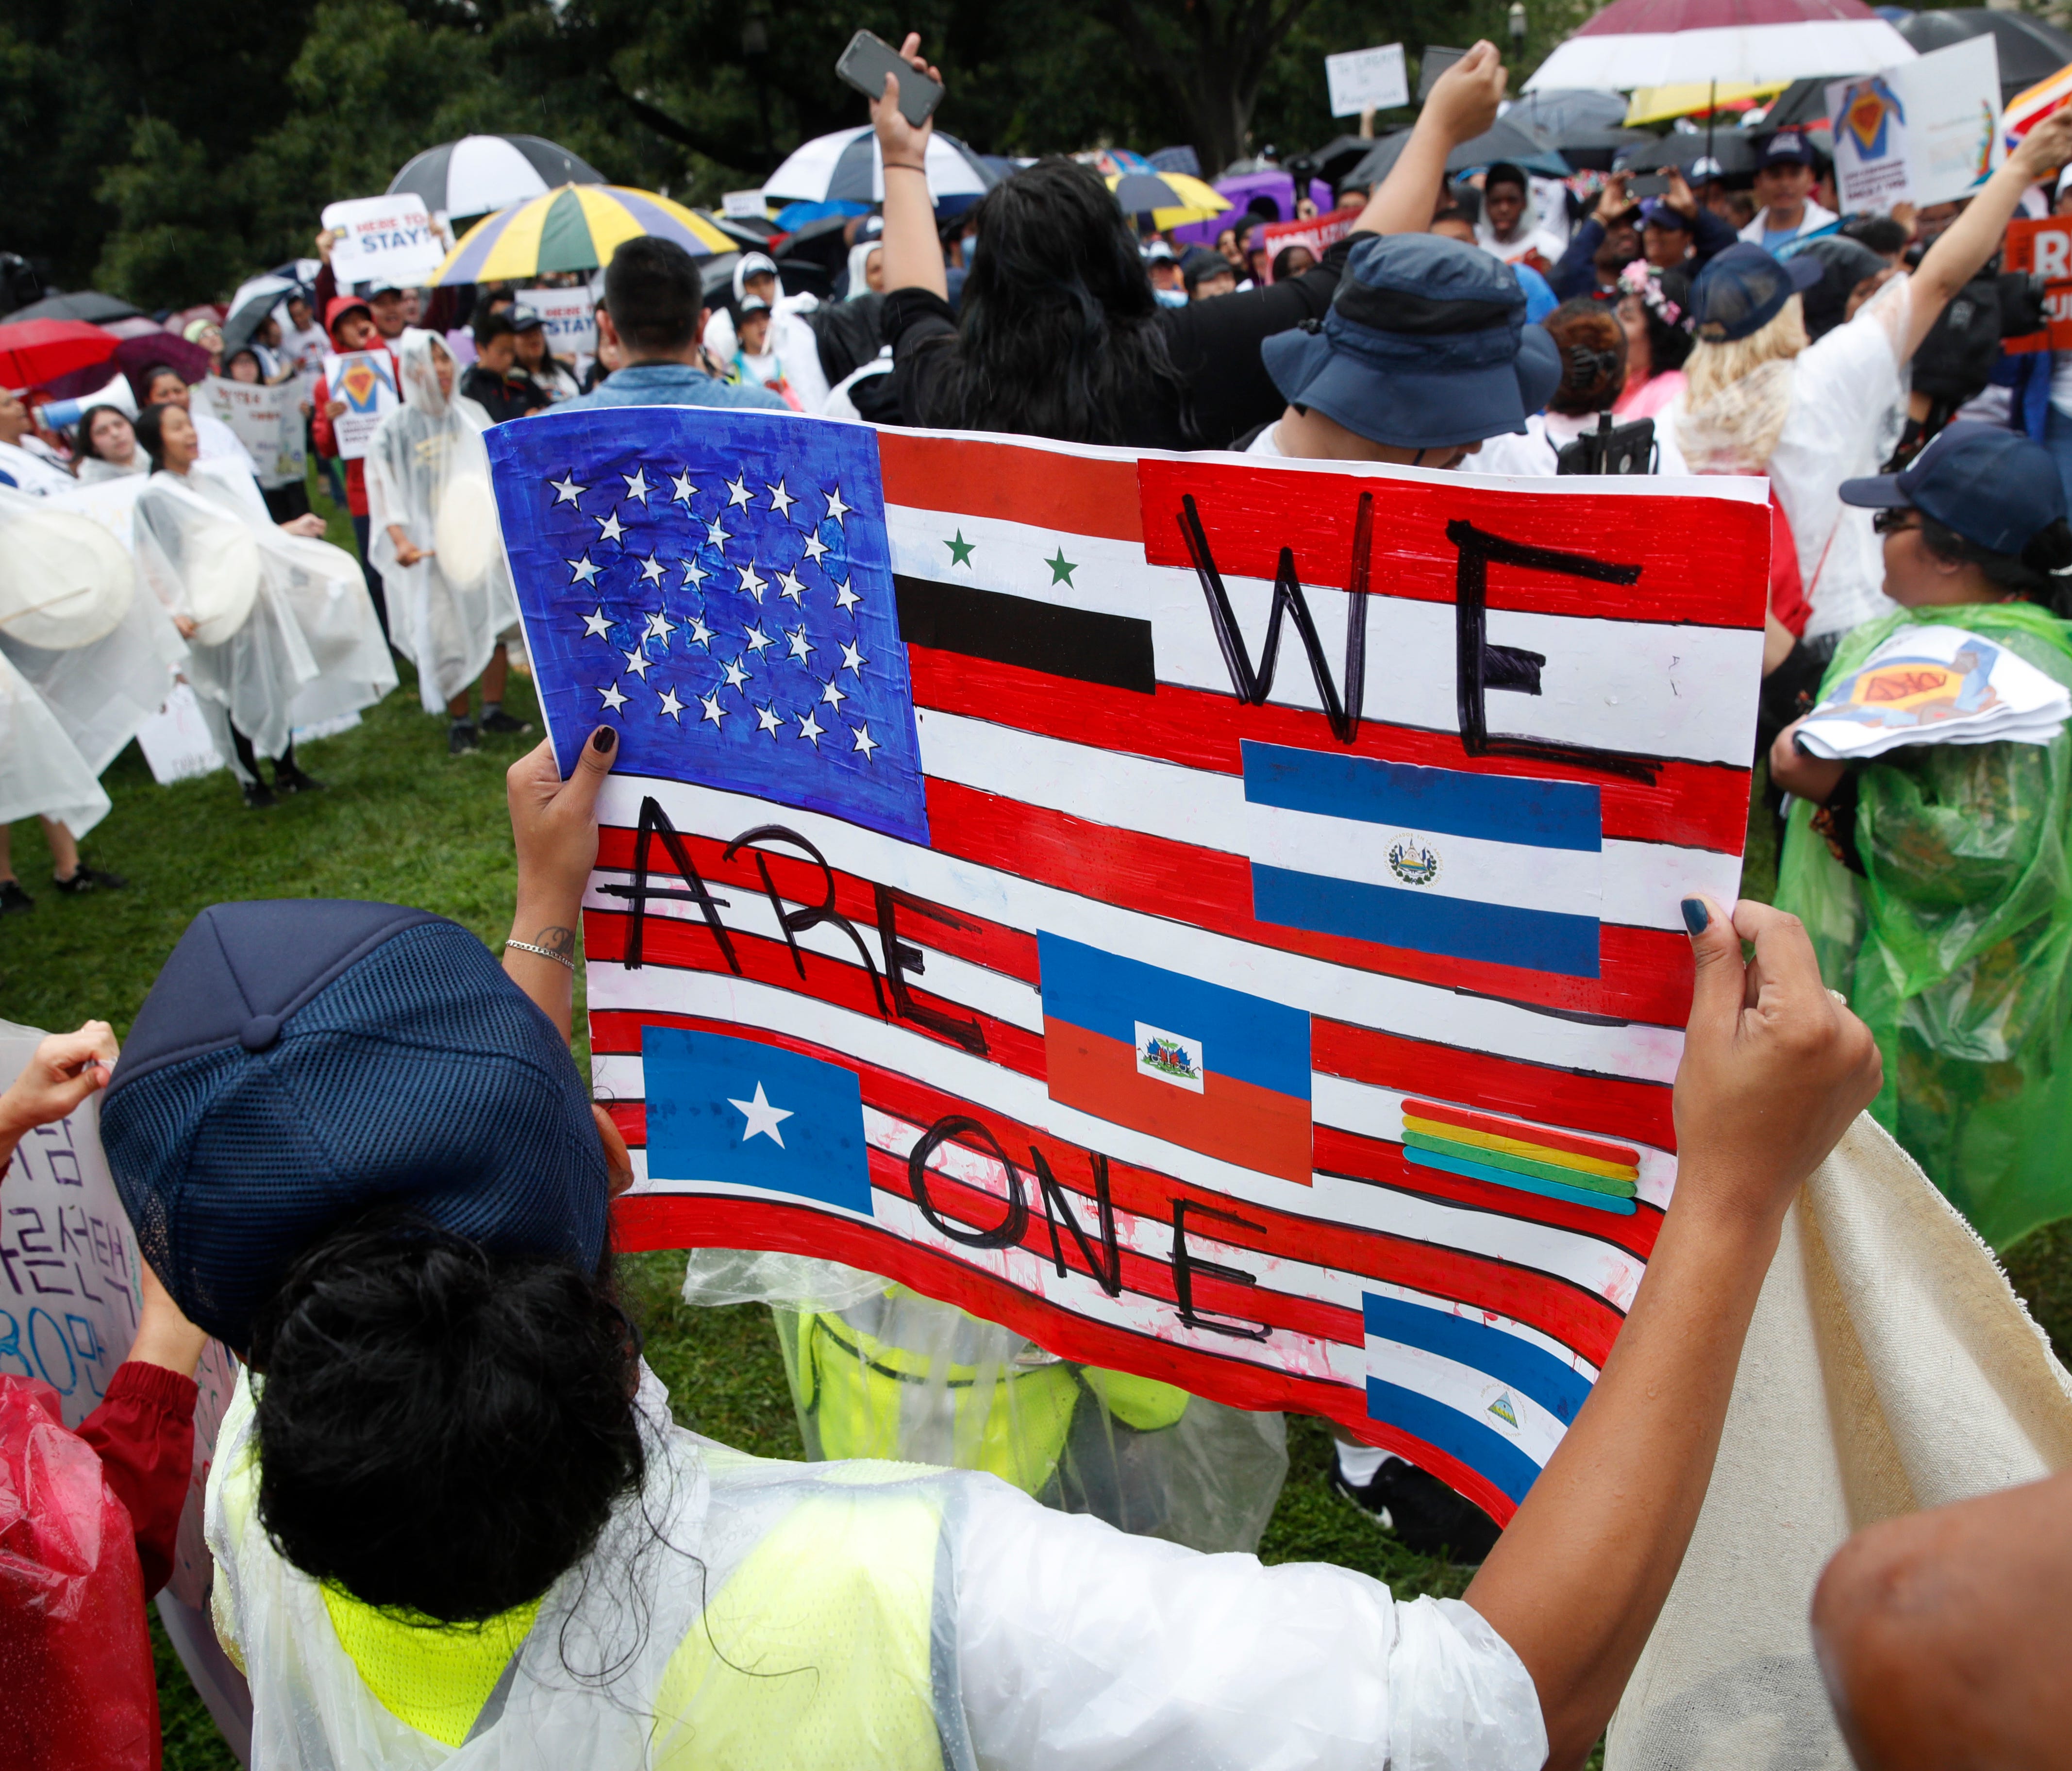 A woman holds a sign declaring one nation of immigrants, during a rally in favor of DACA and immigration reform on Aug. 15, 2017, at the White House in Washington. The protesters want to preserve the Obama administration program known as Deferred Act